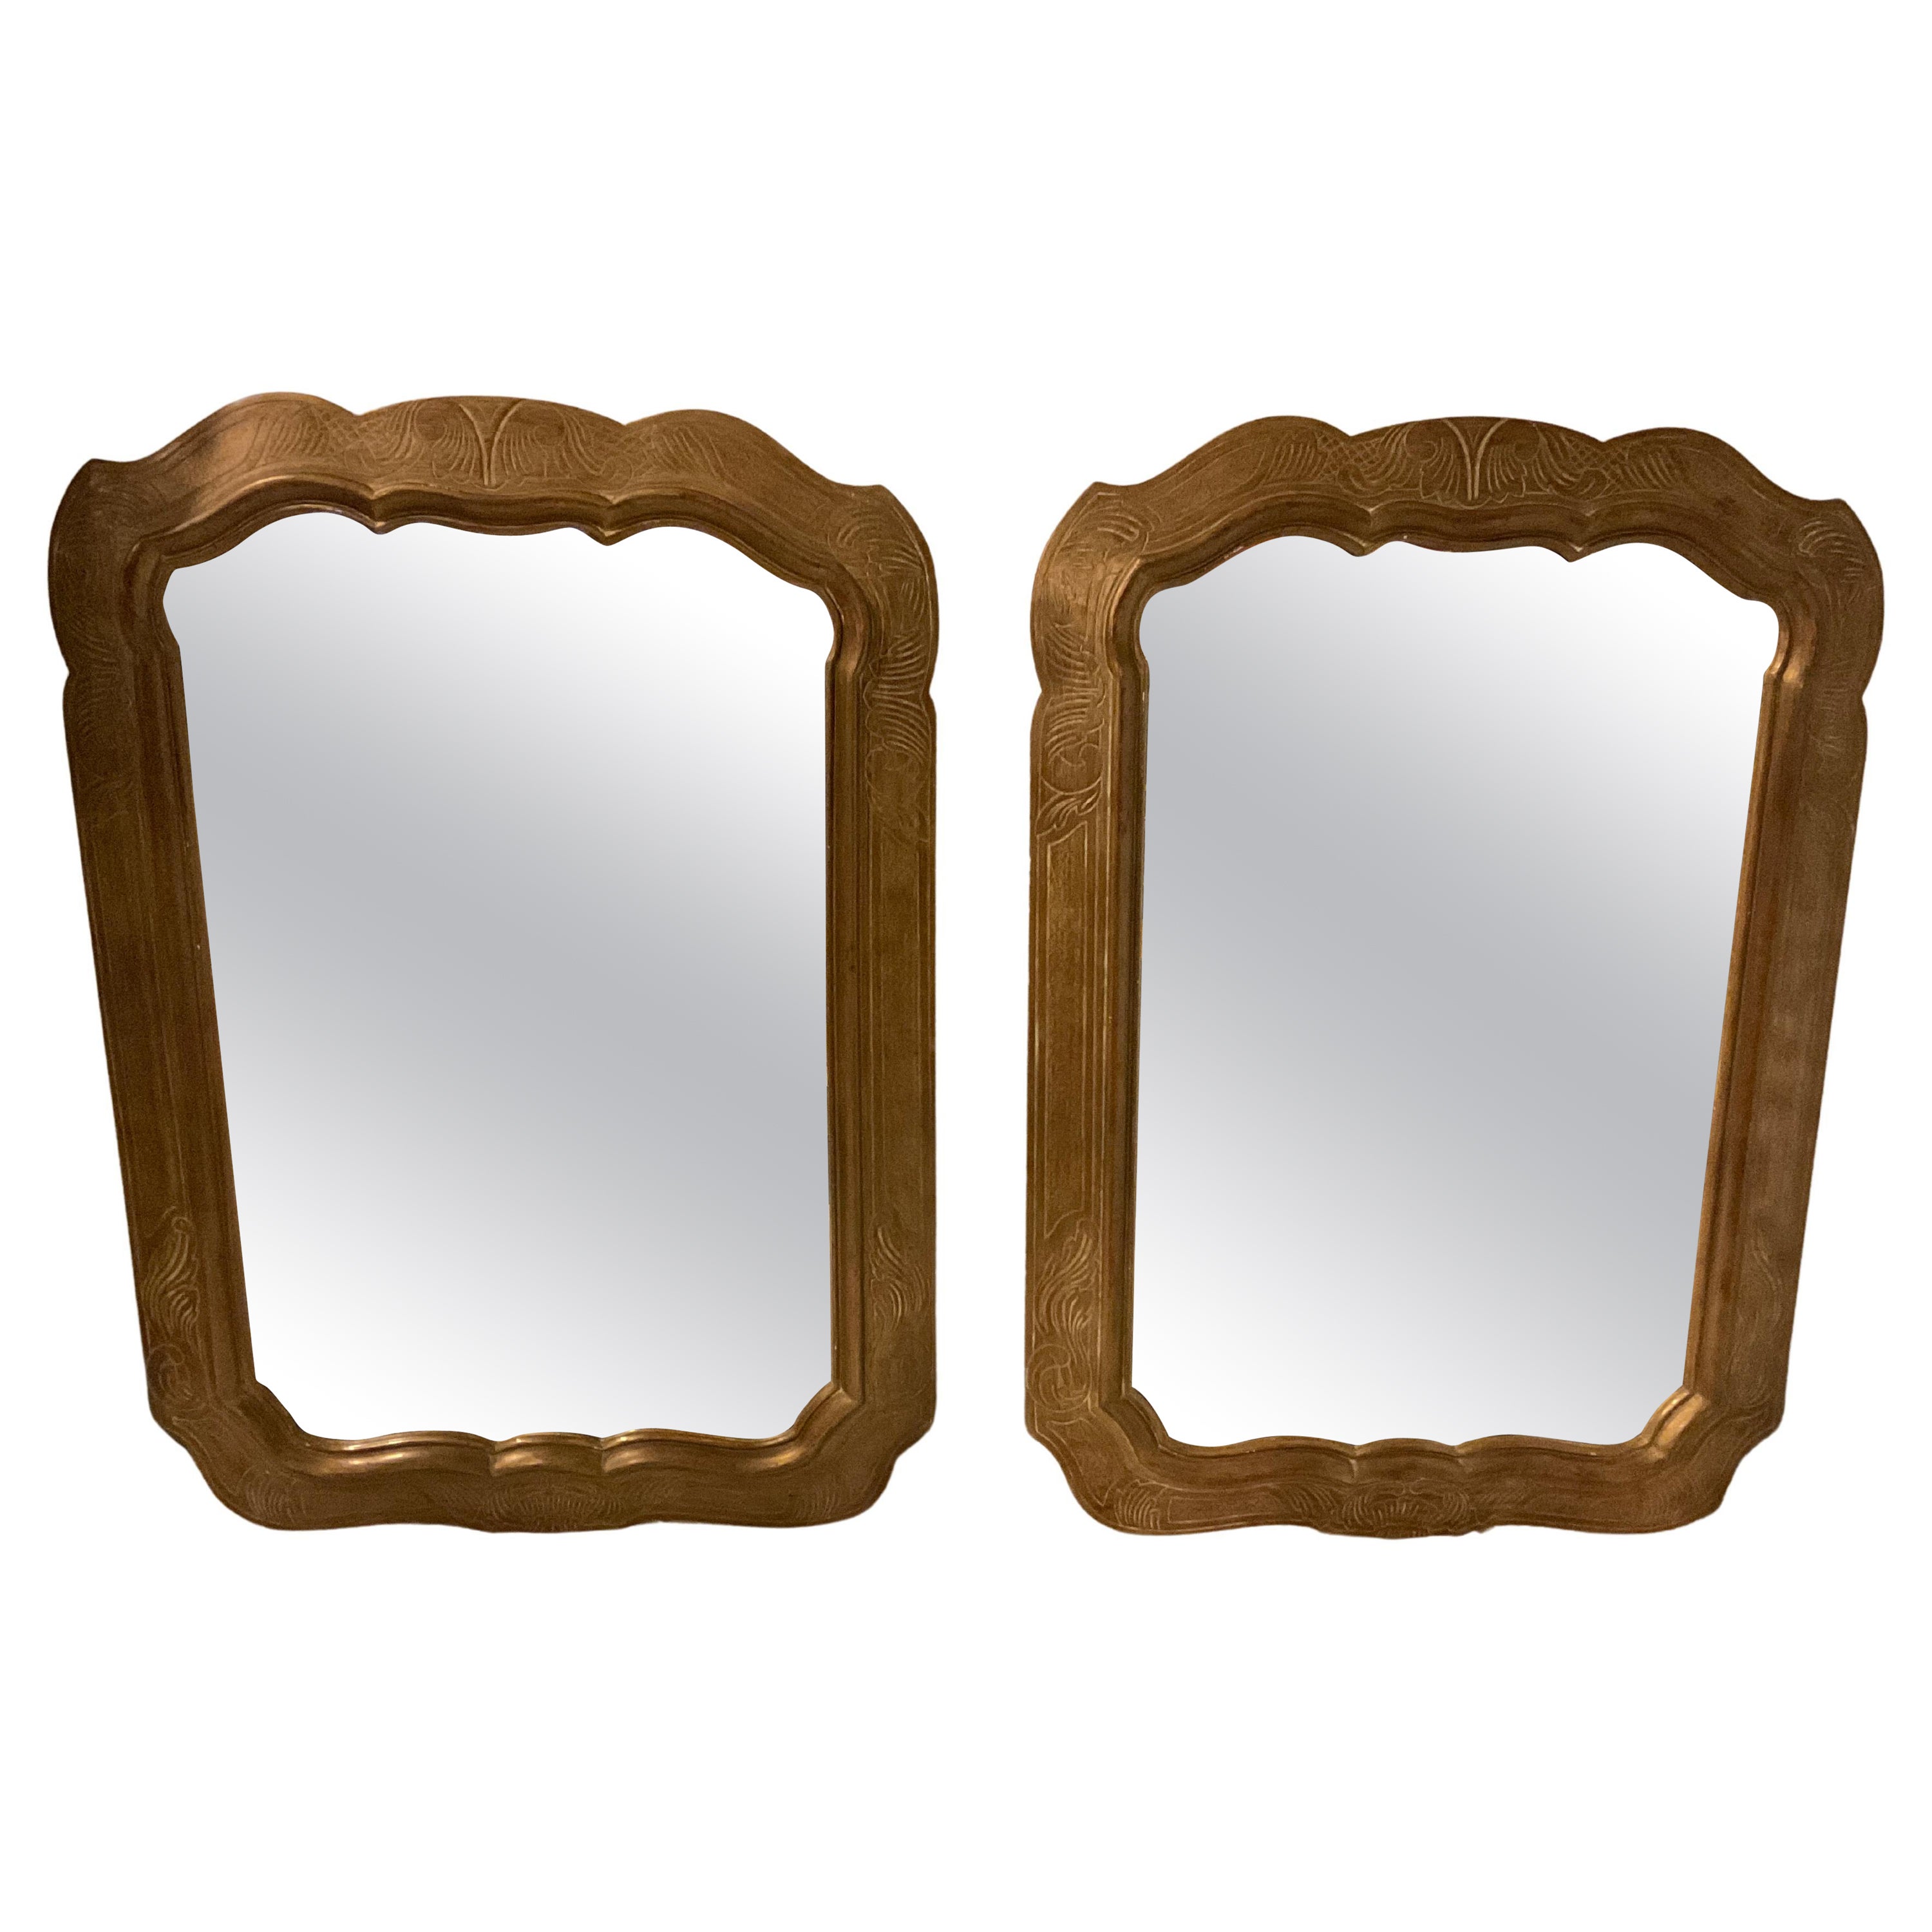 Pair Of 1950s Decorative Wood Mirrors For Sale